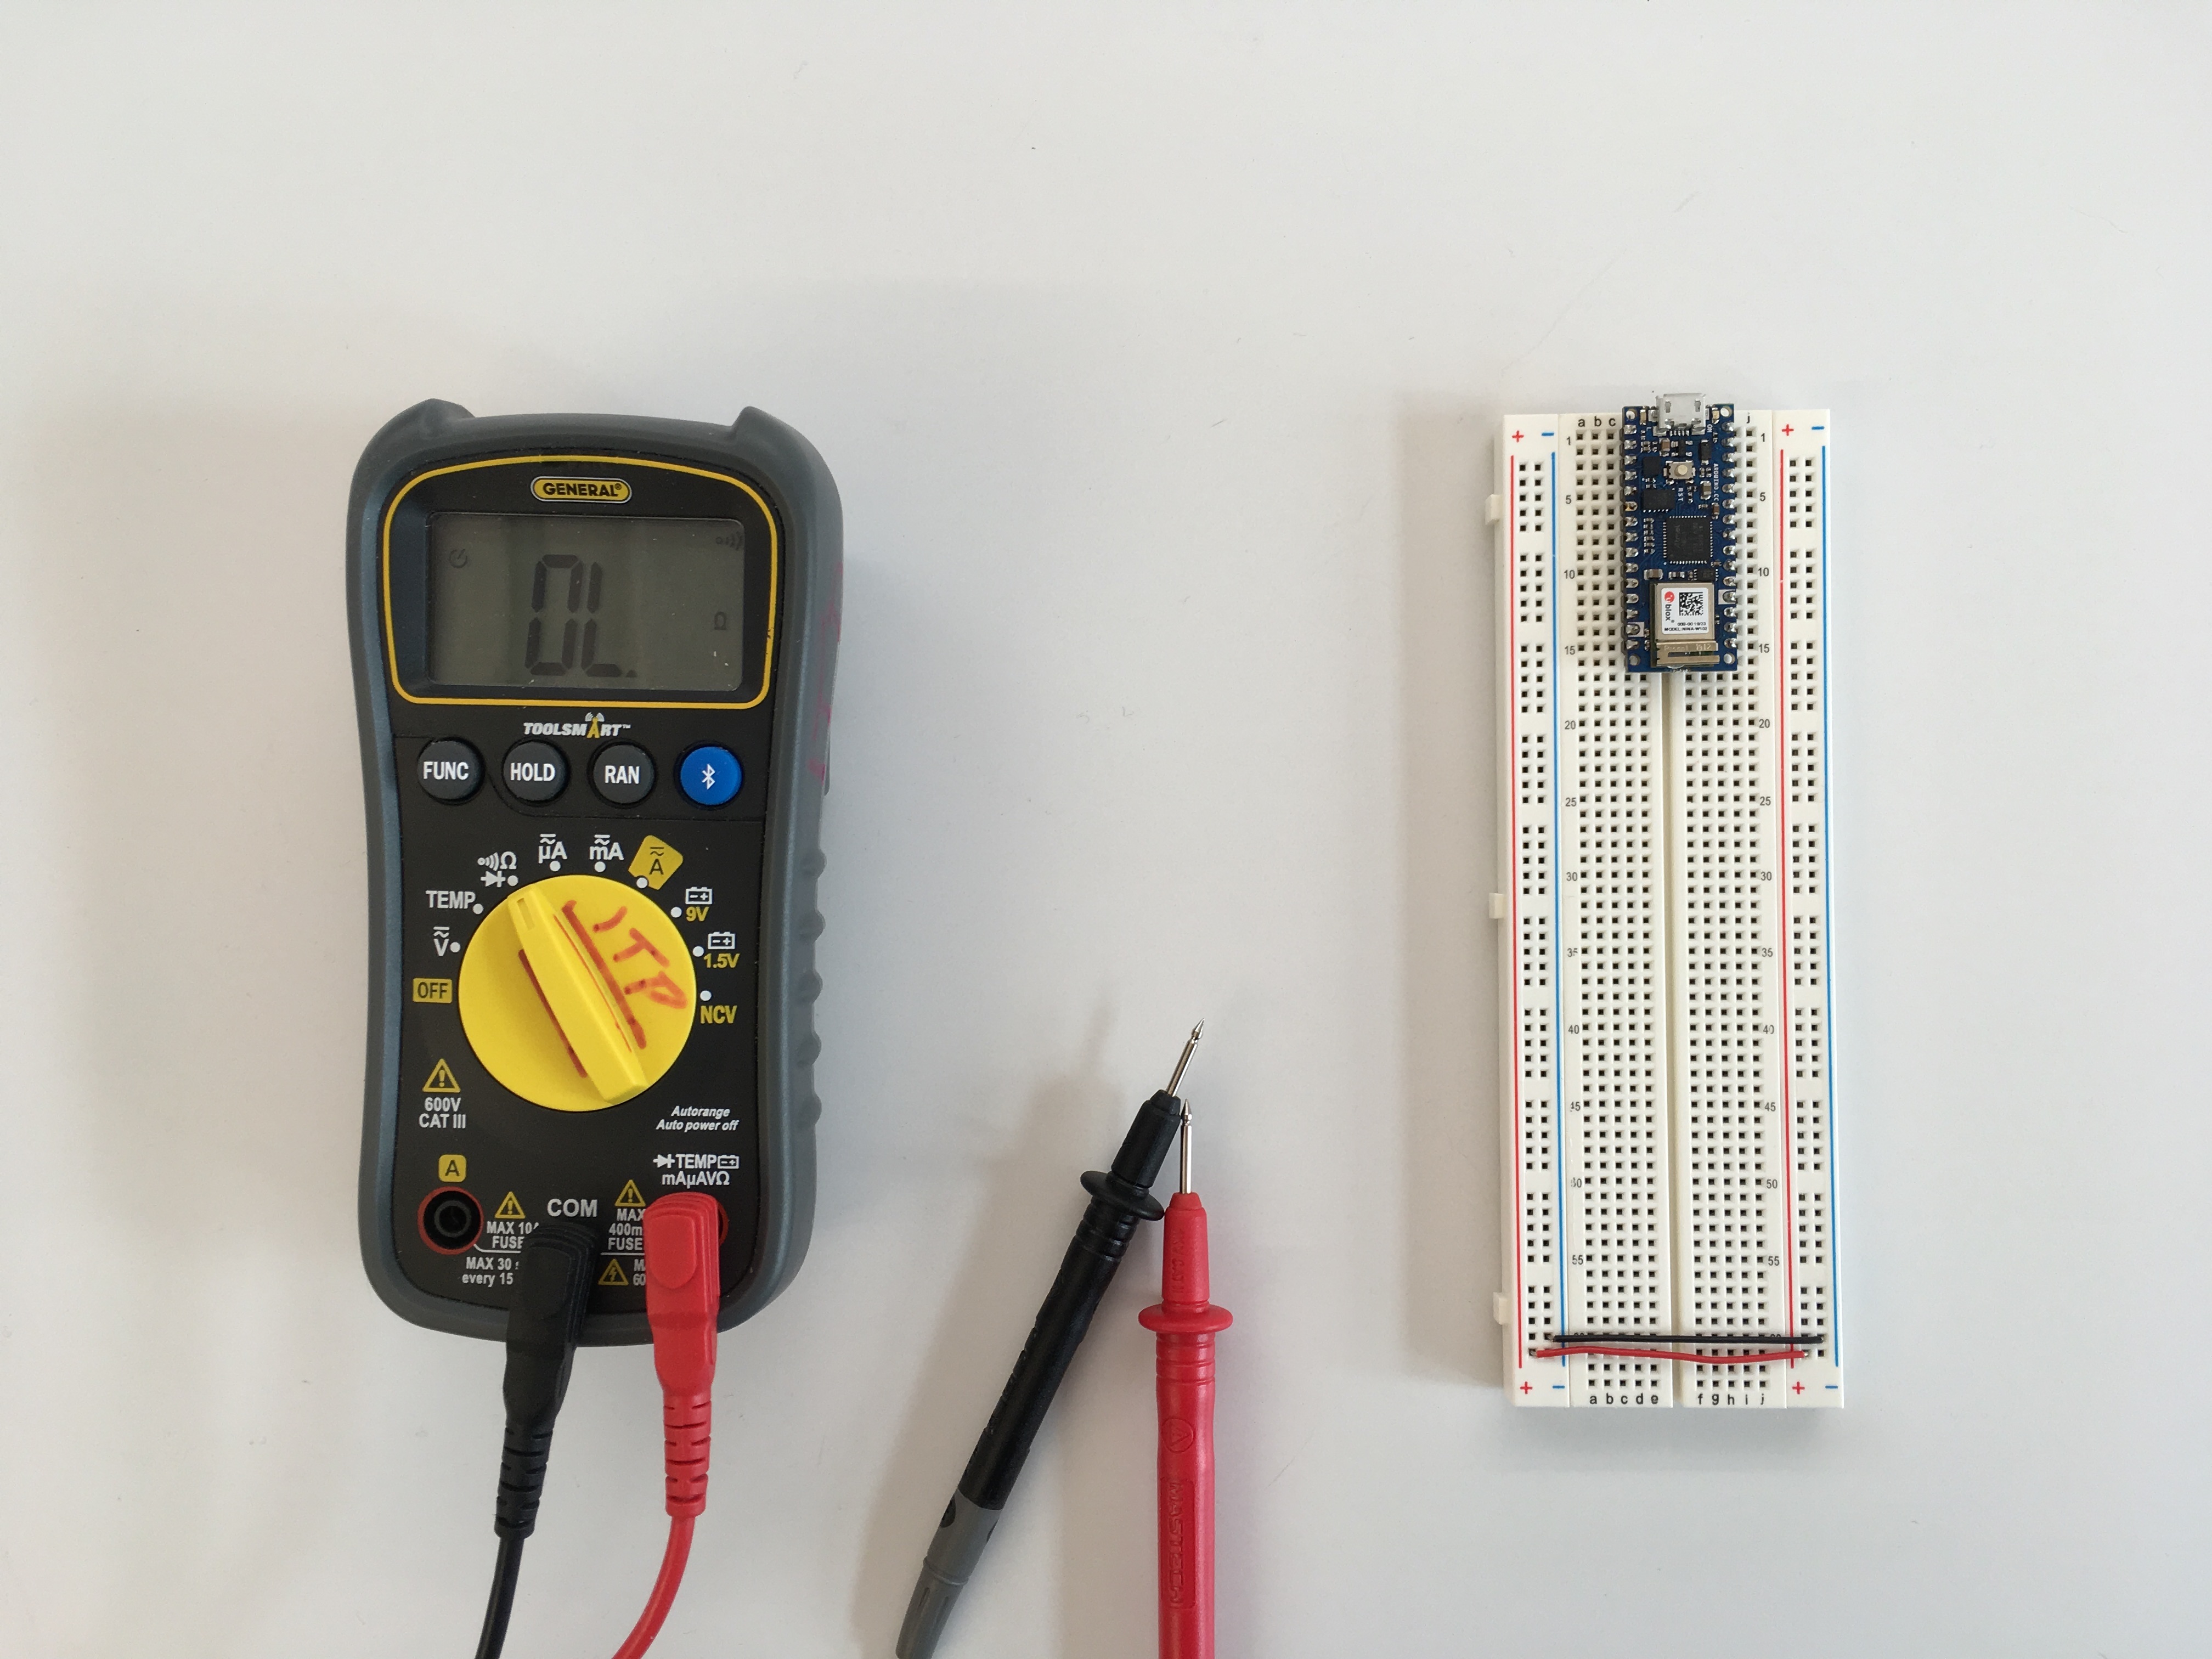 Setting up the breadboard, part 1: connecting the breadboard's side rows to each 